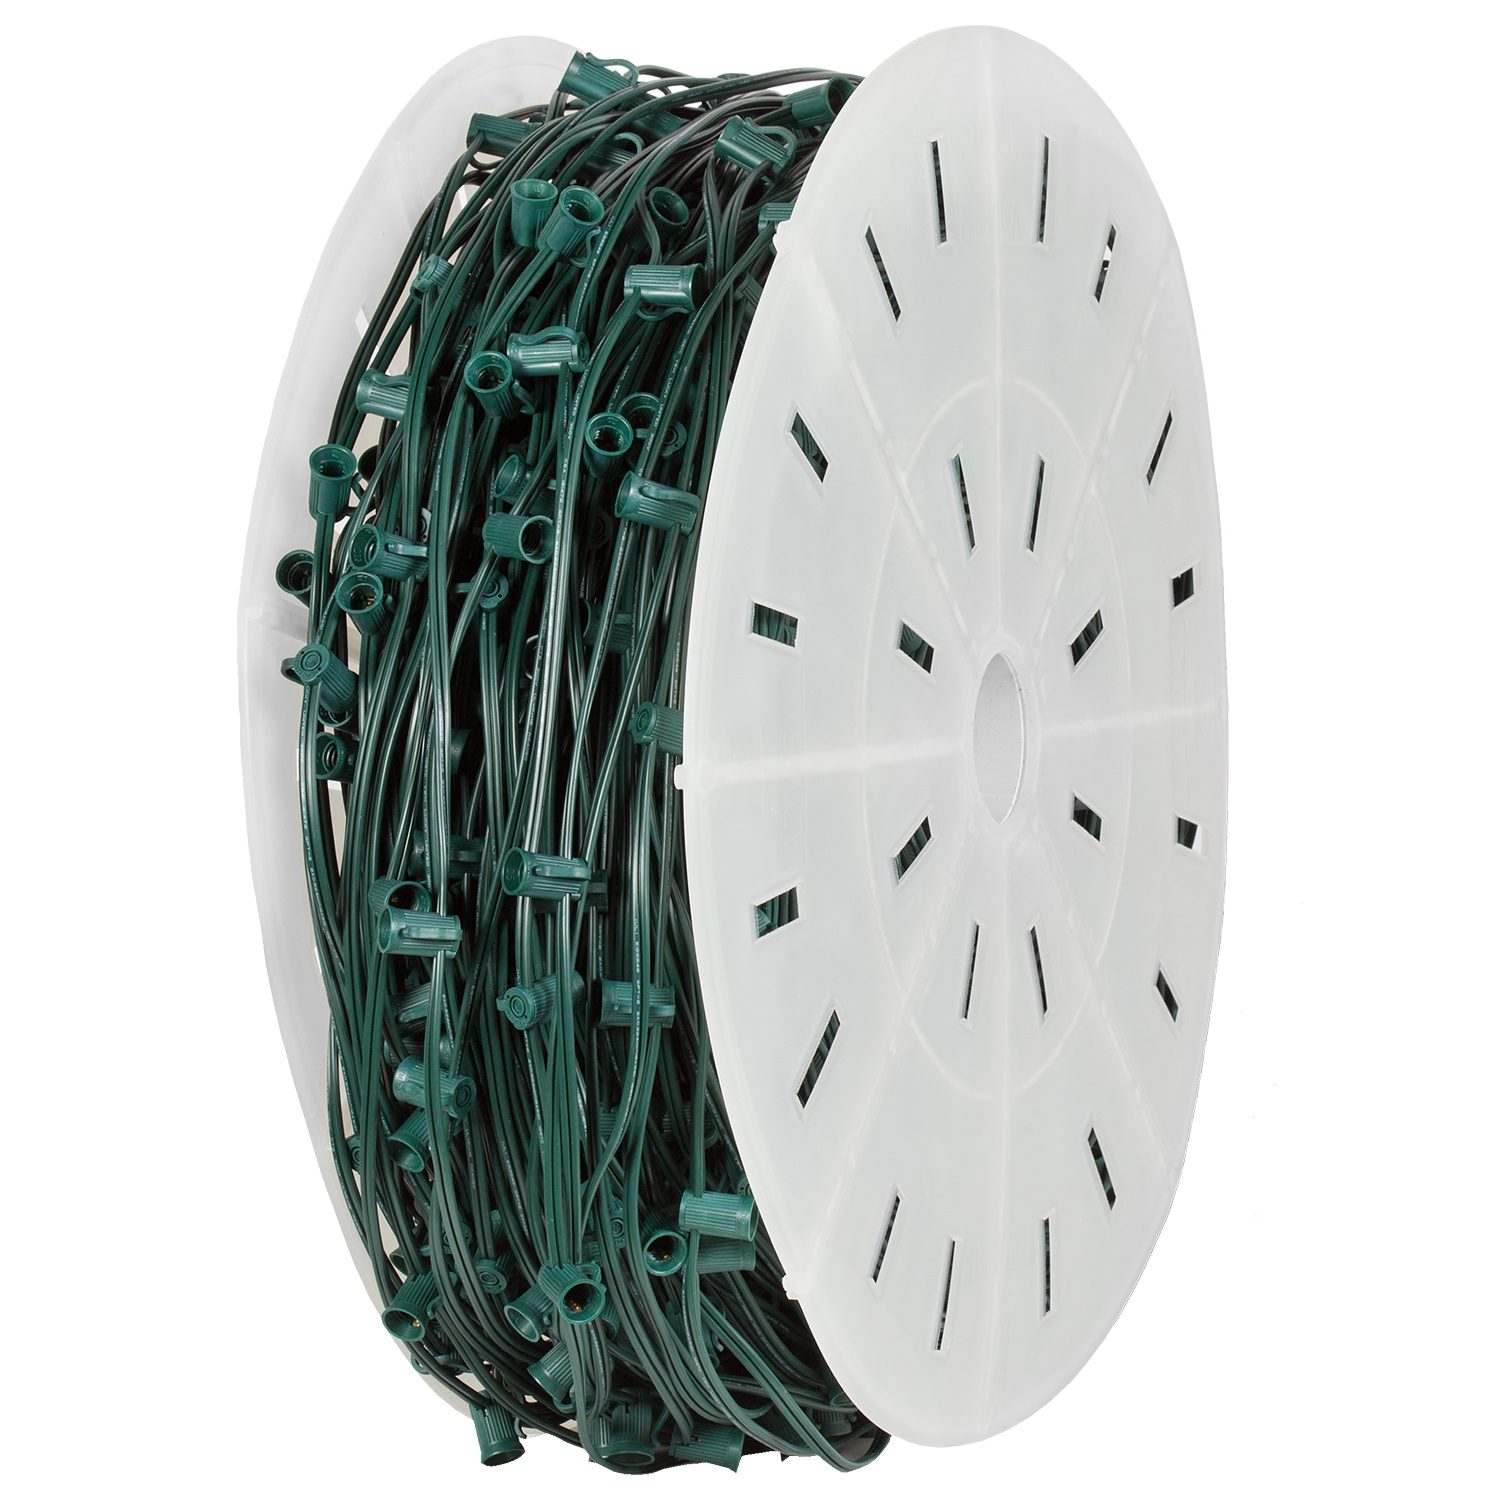 C9 Christmas Lights 1000 C9 Commercial Light Spool Spt2 Green Wire 12 Spacing Christmas Lights Etc pertaining to dimensions 1500 X 1500